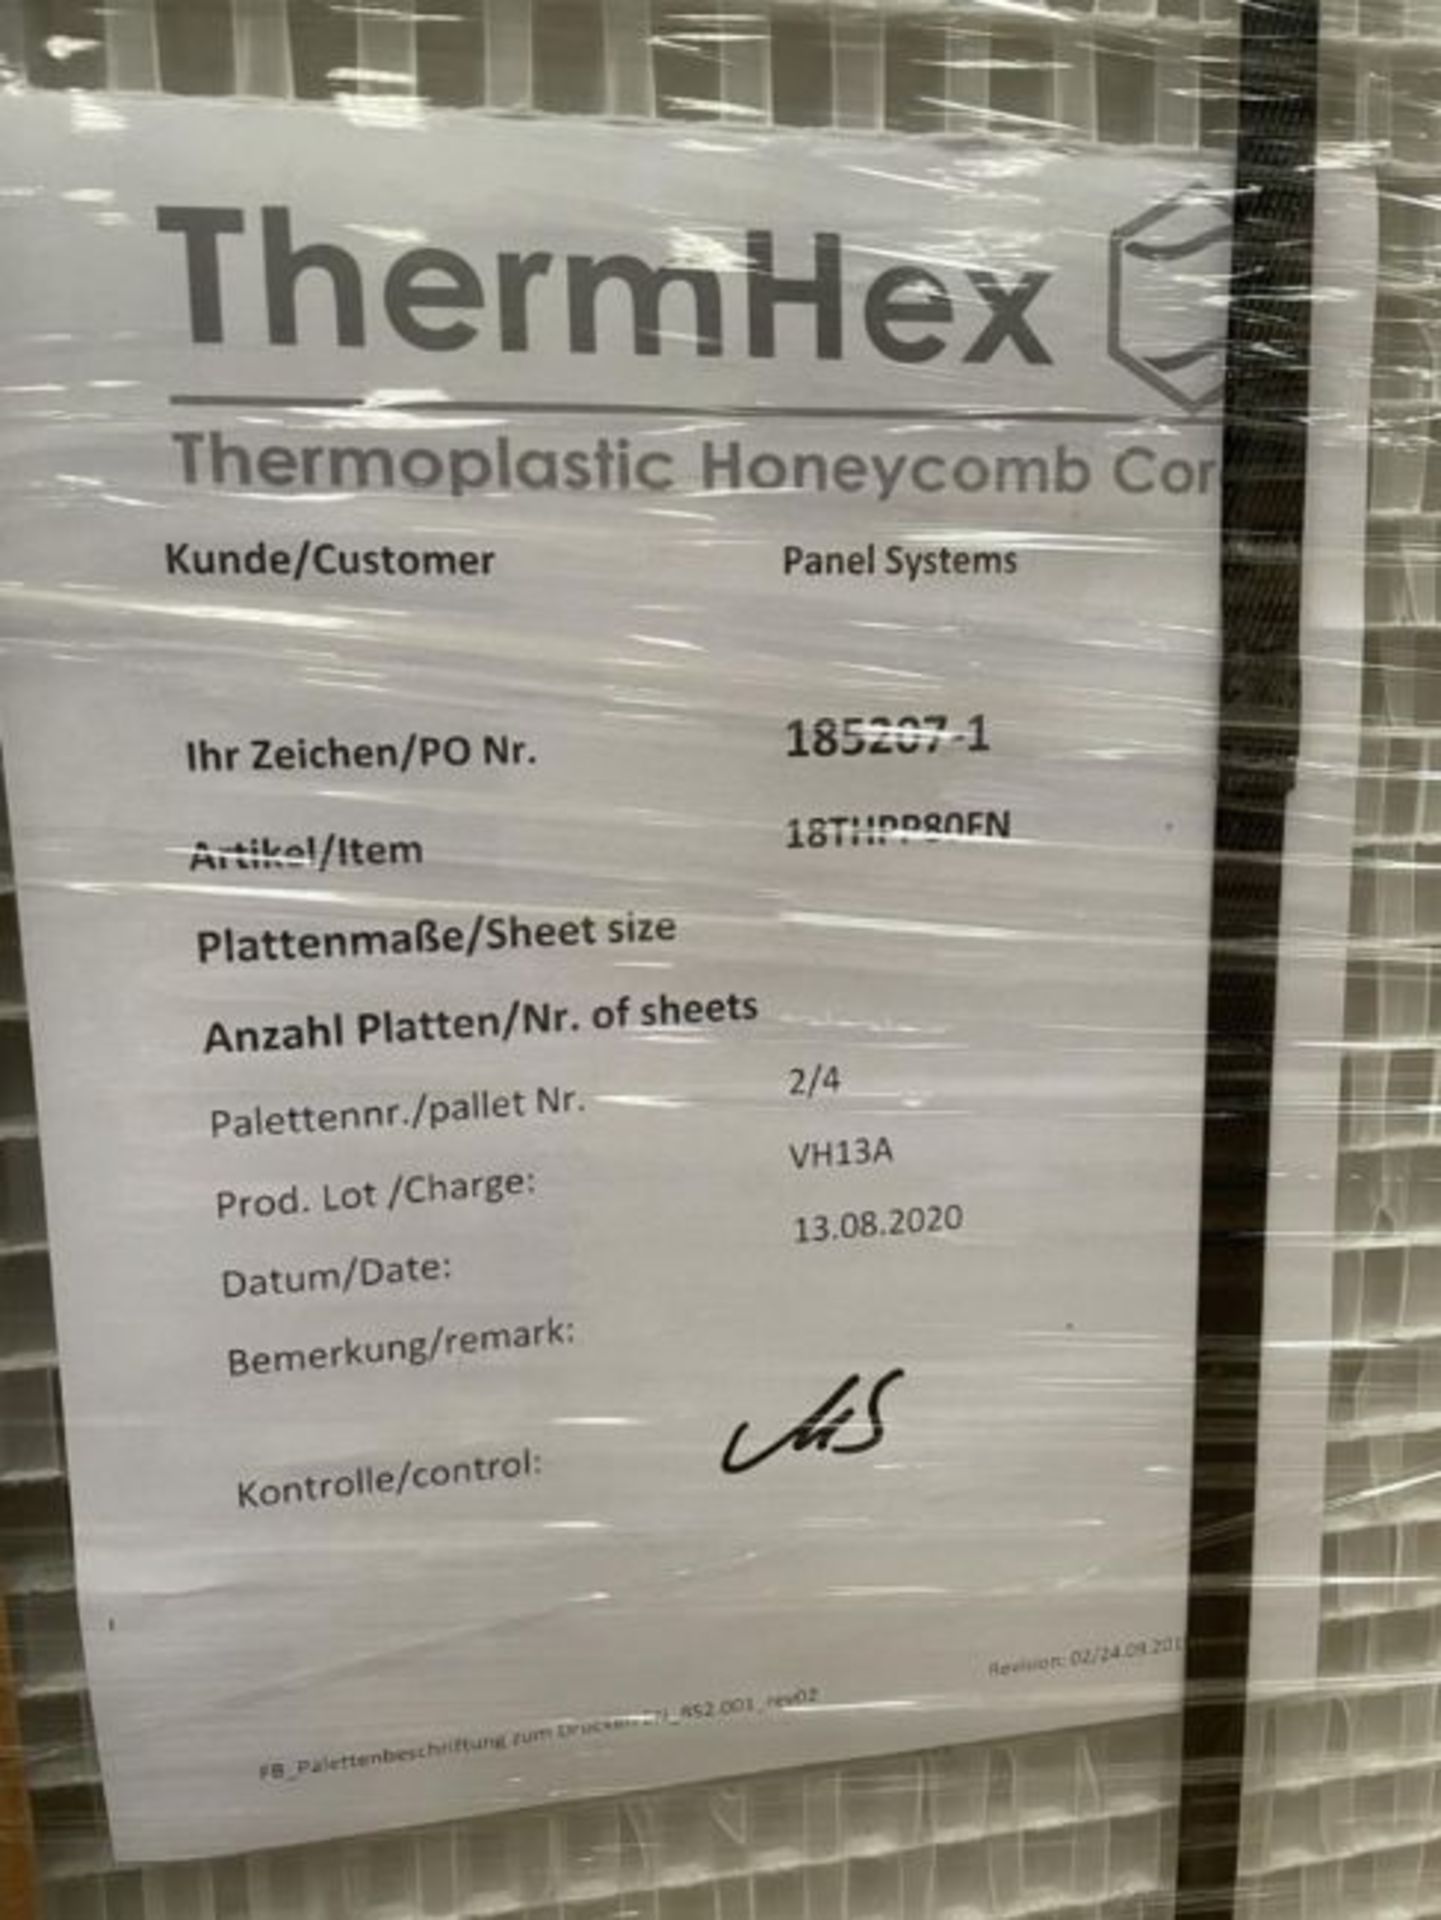 100 x ThermHex Thermoplastic Honeycomb Core Panels - Size: 693 x 1210 x 20mm - New Stock - Lightweig - Image 10 of 10